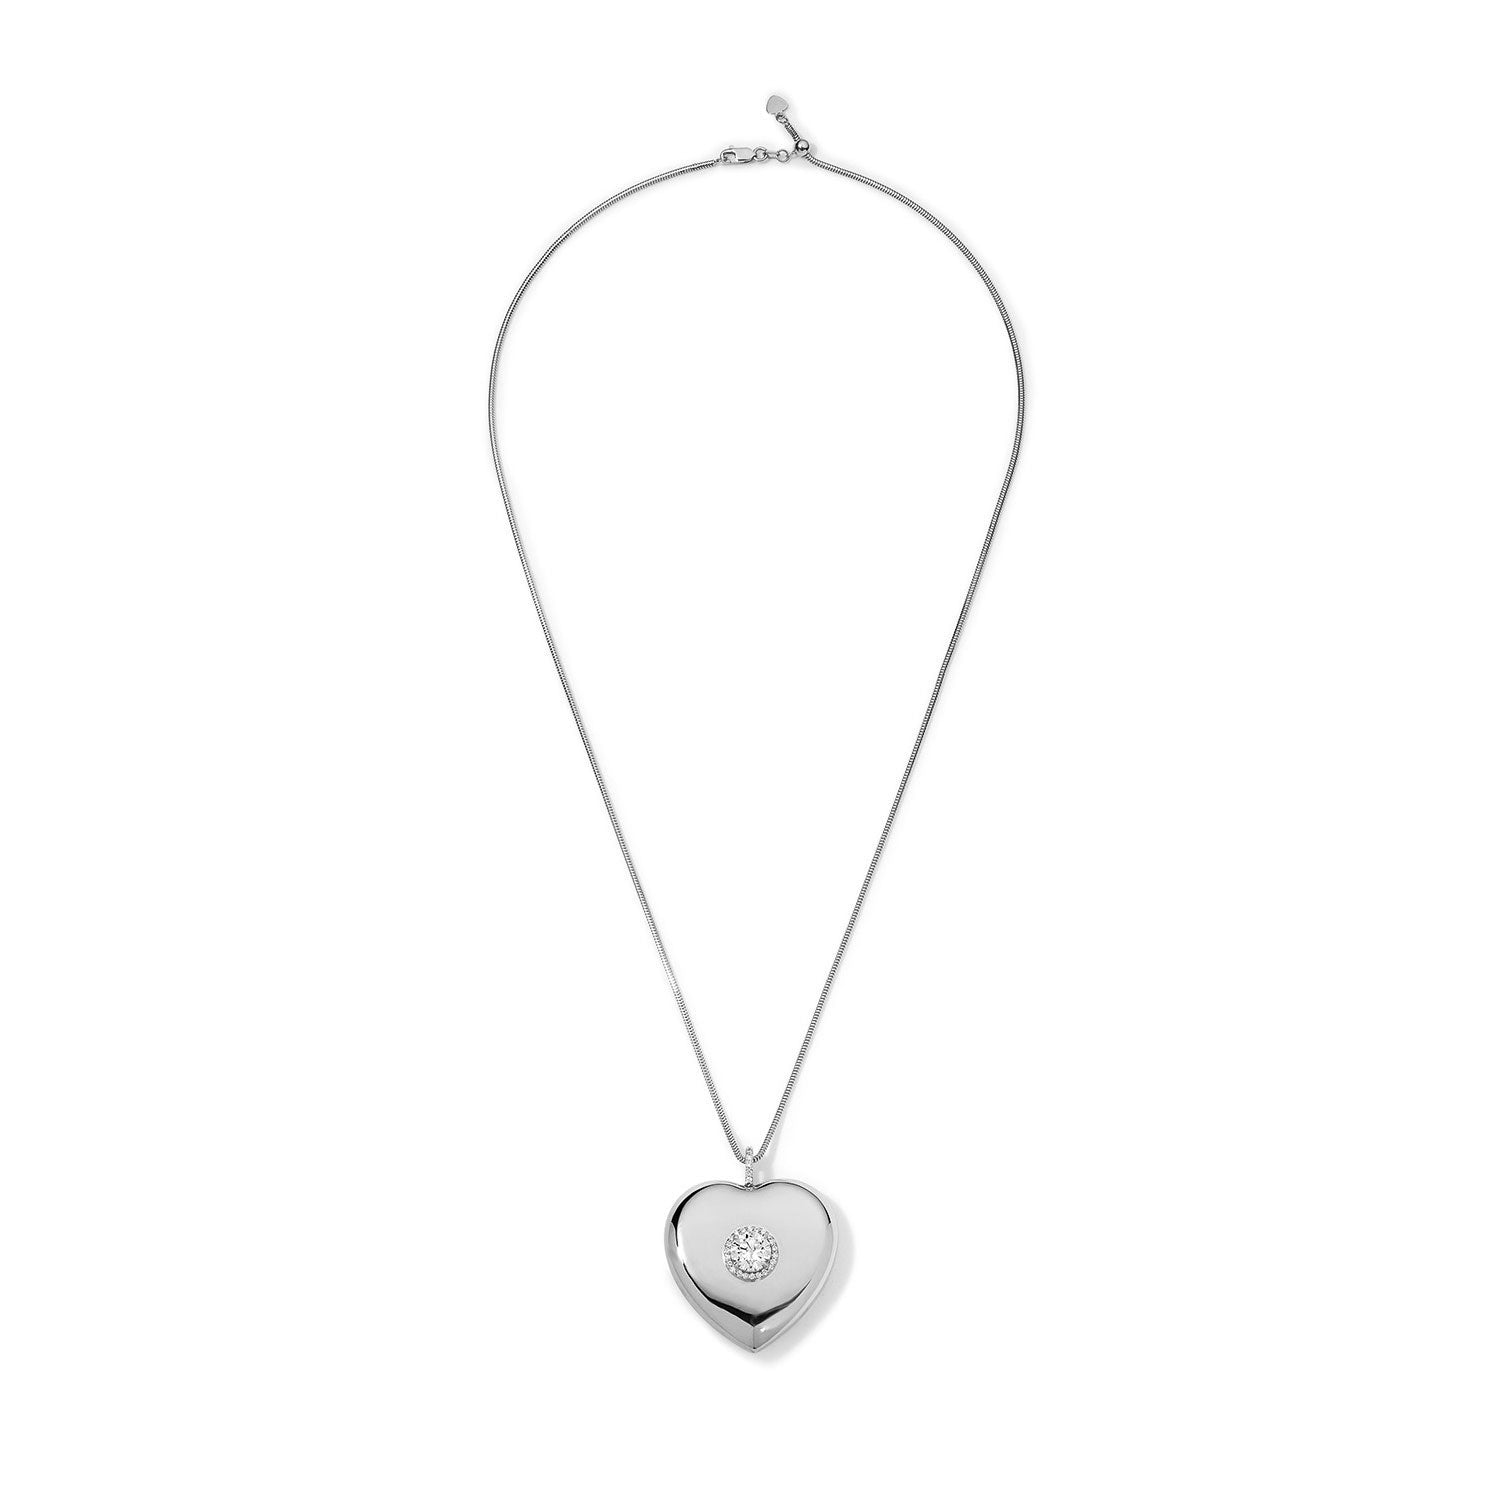 Diamond Heart Button Necklace with Round Center